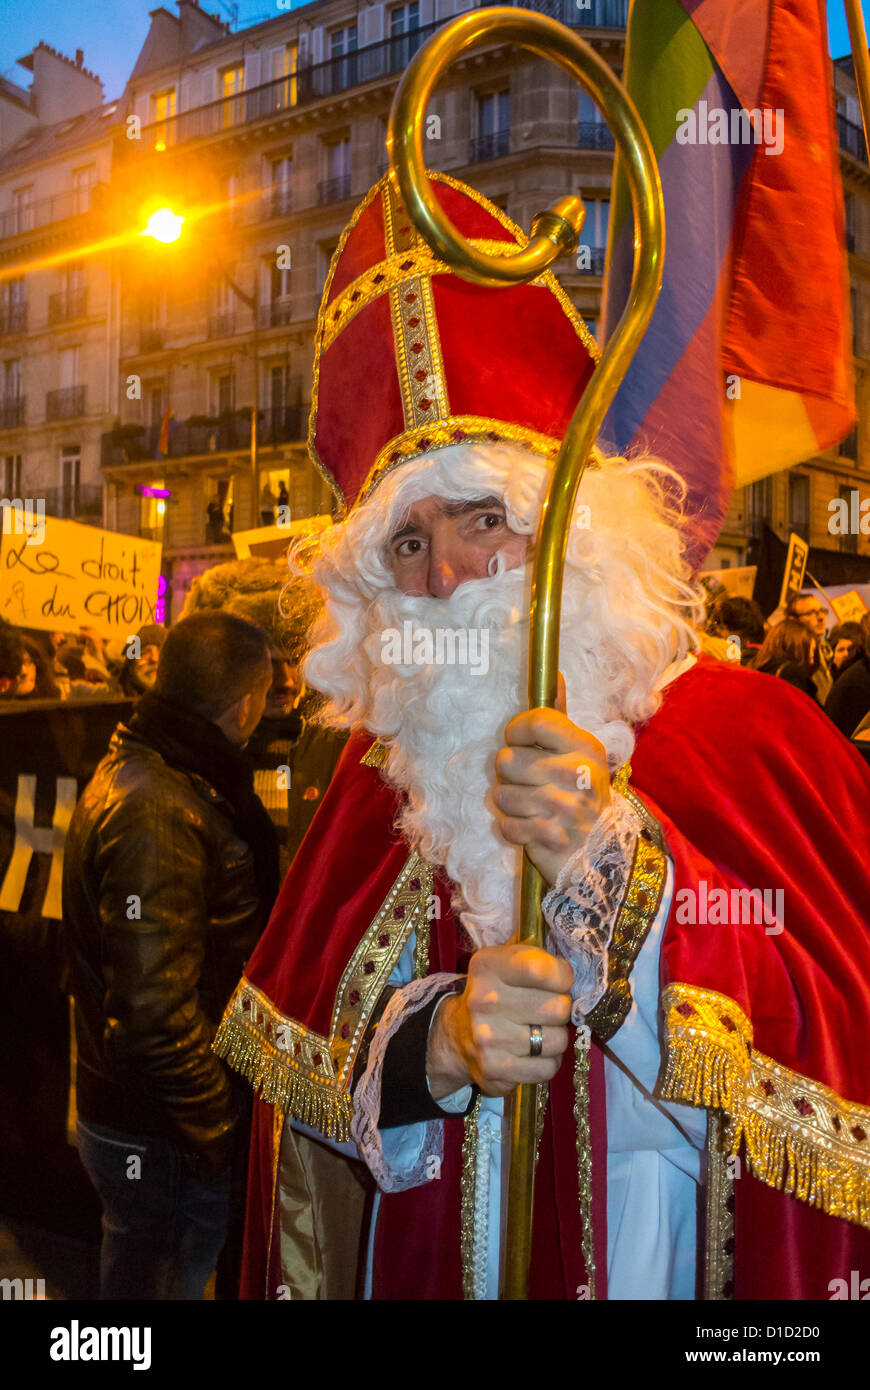 Paris, France, Man in Religious Bishop's Costume, Marching in Gay Marriage Demonstration, with many LGBT Activism Groups,, 2012 Stock Photo